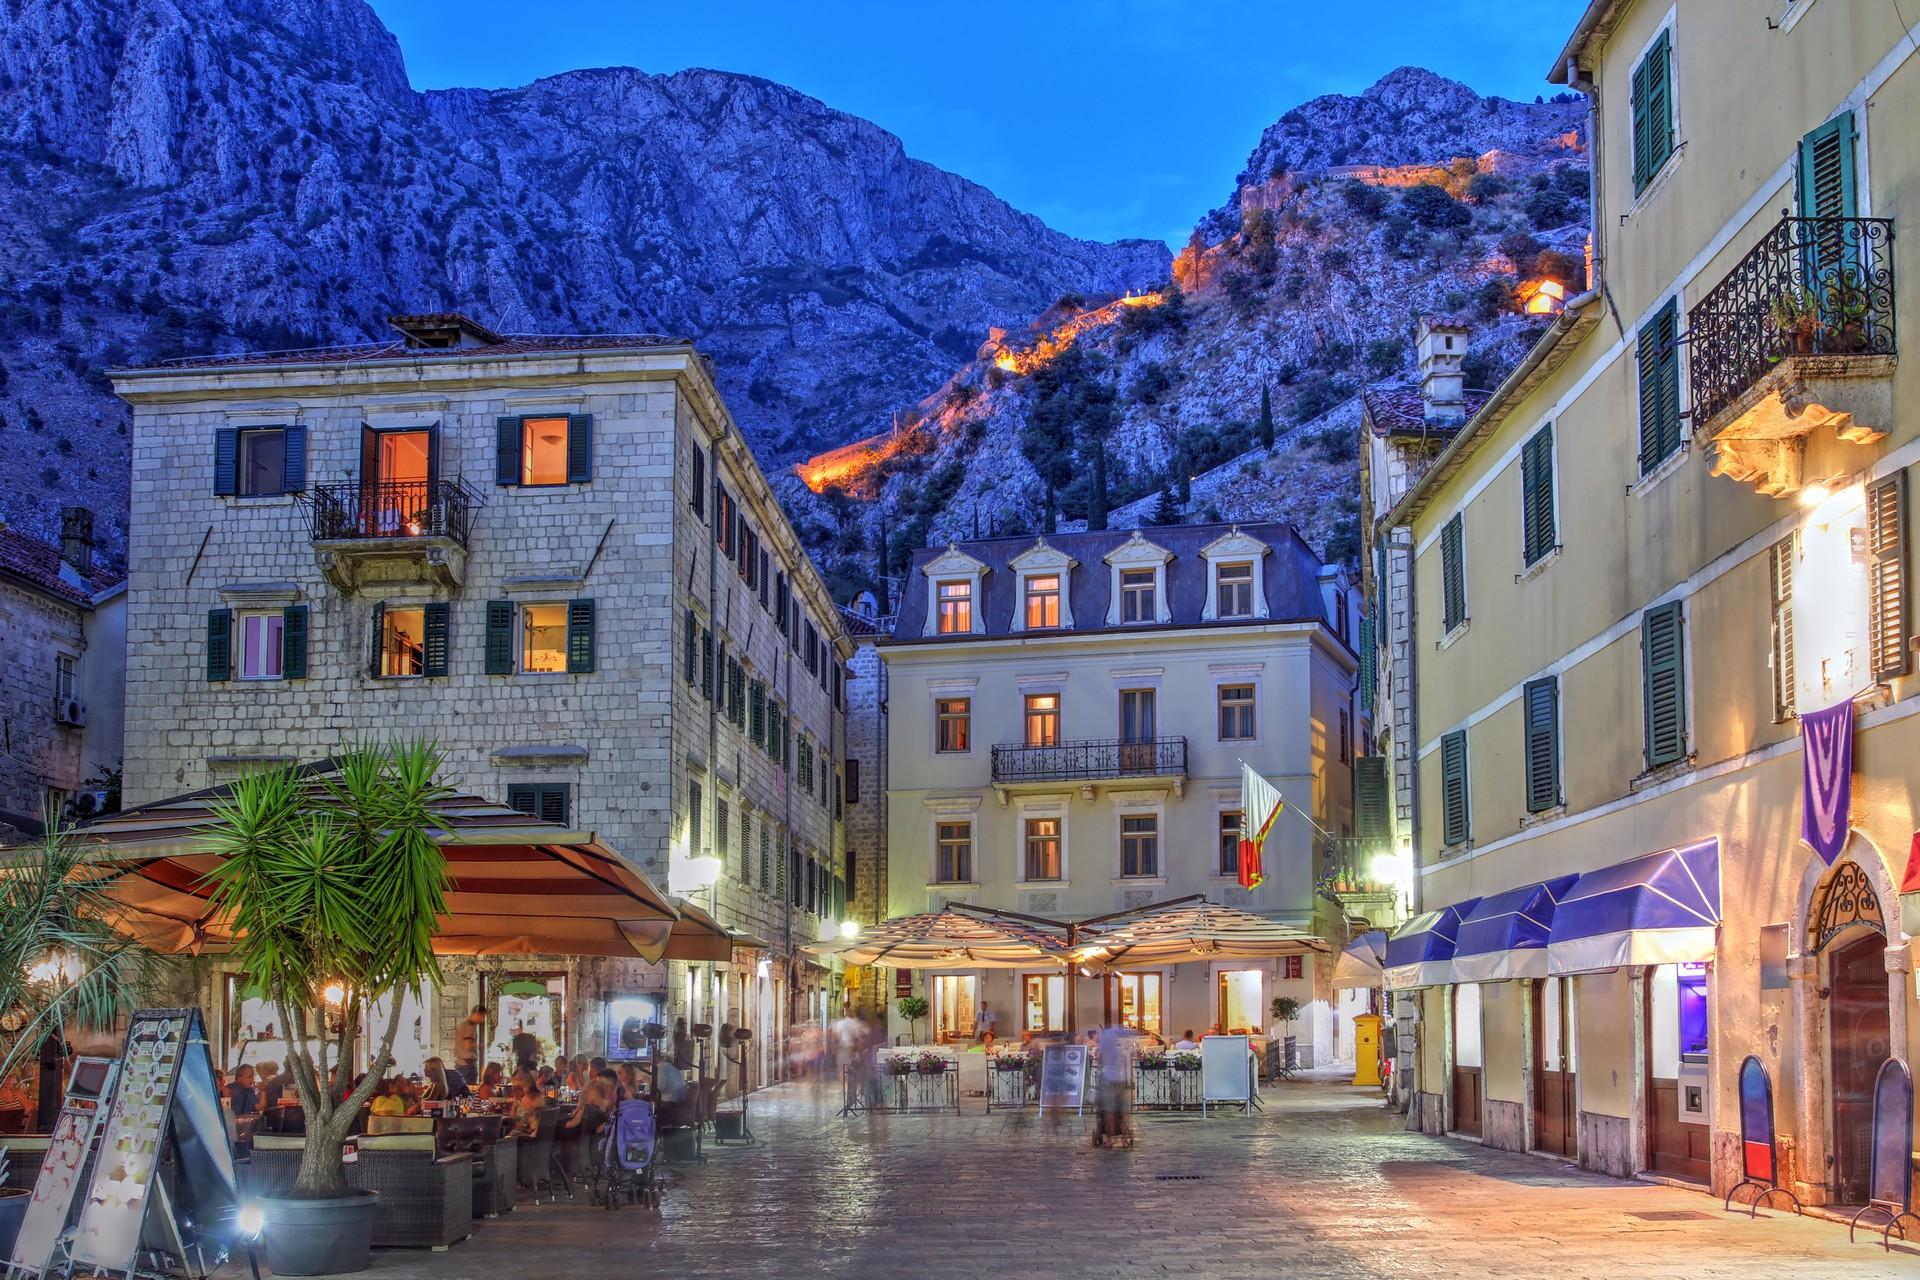 City square in Kotor at sunset time